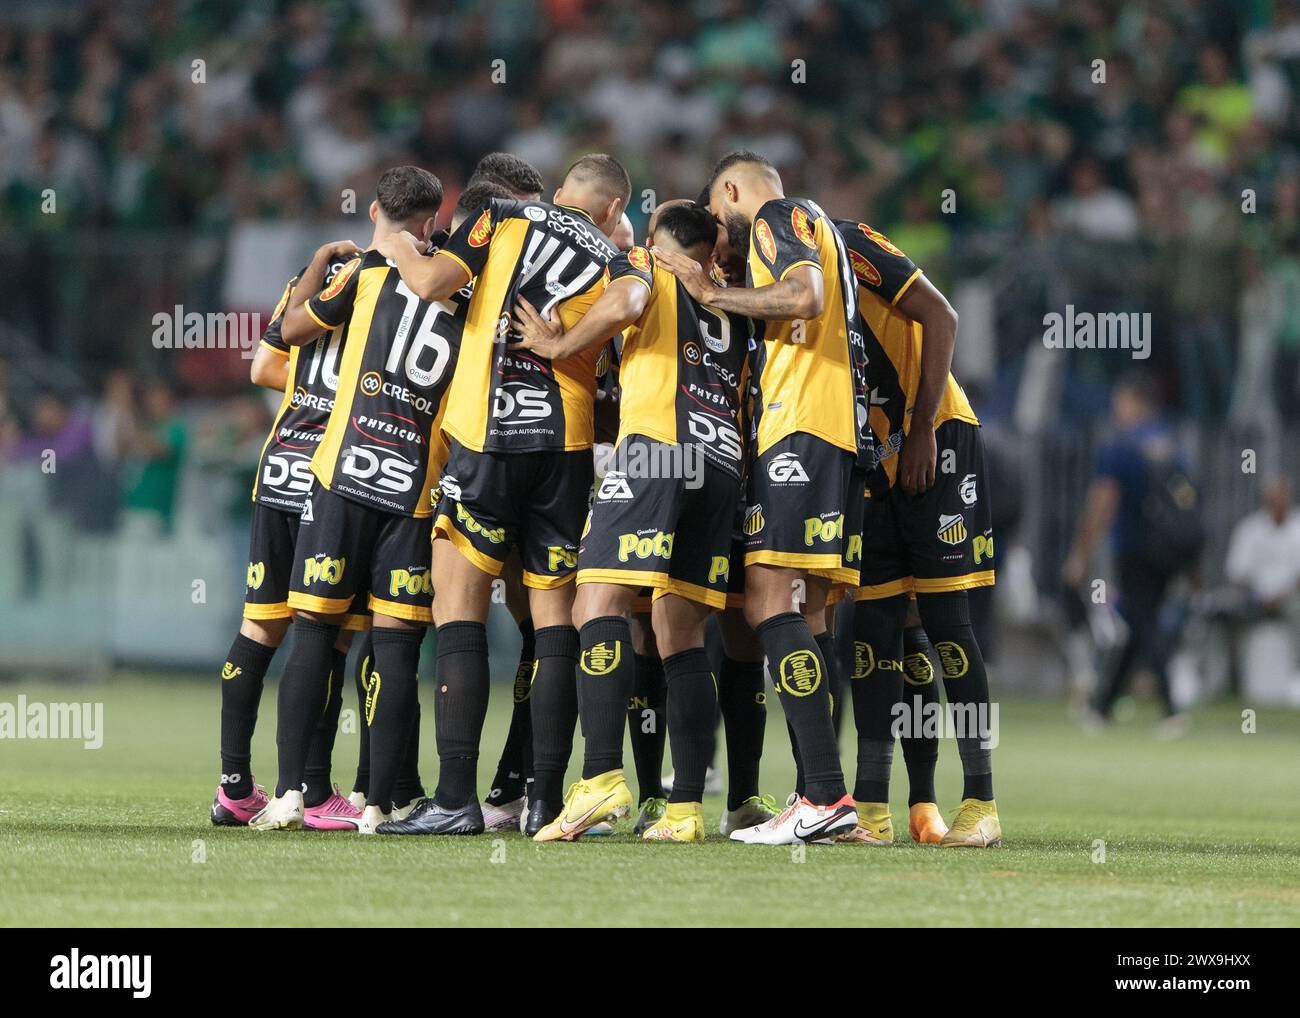 São Paulo (SP), Brazil. March 28, 2024 - Football / Palmeiras vs Novorizontino - Novozorentino team posed for picture during the match between Palmeiras and Novorizontino, a game valid for the semifinals of the 2024 São Paulo Football Championship, held at the Allianz Parque stadium, on Thursday night (28). Credit: Vilmar Bannach/Alamy Live News Stock Photo